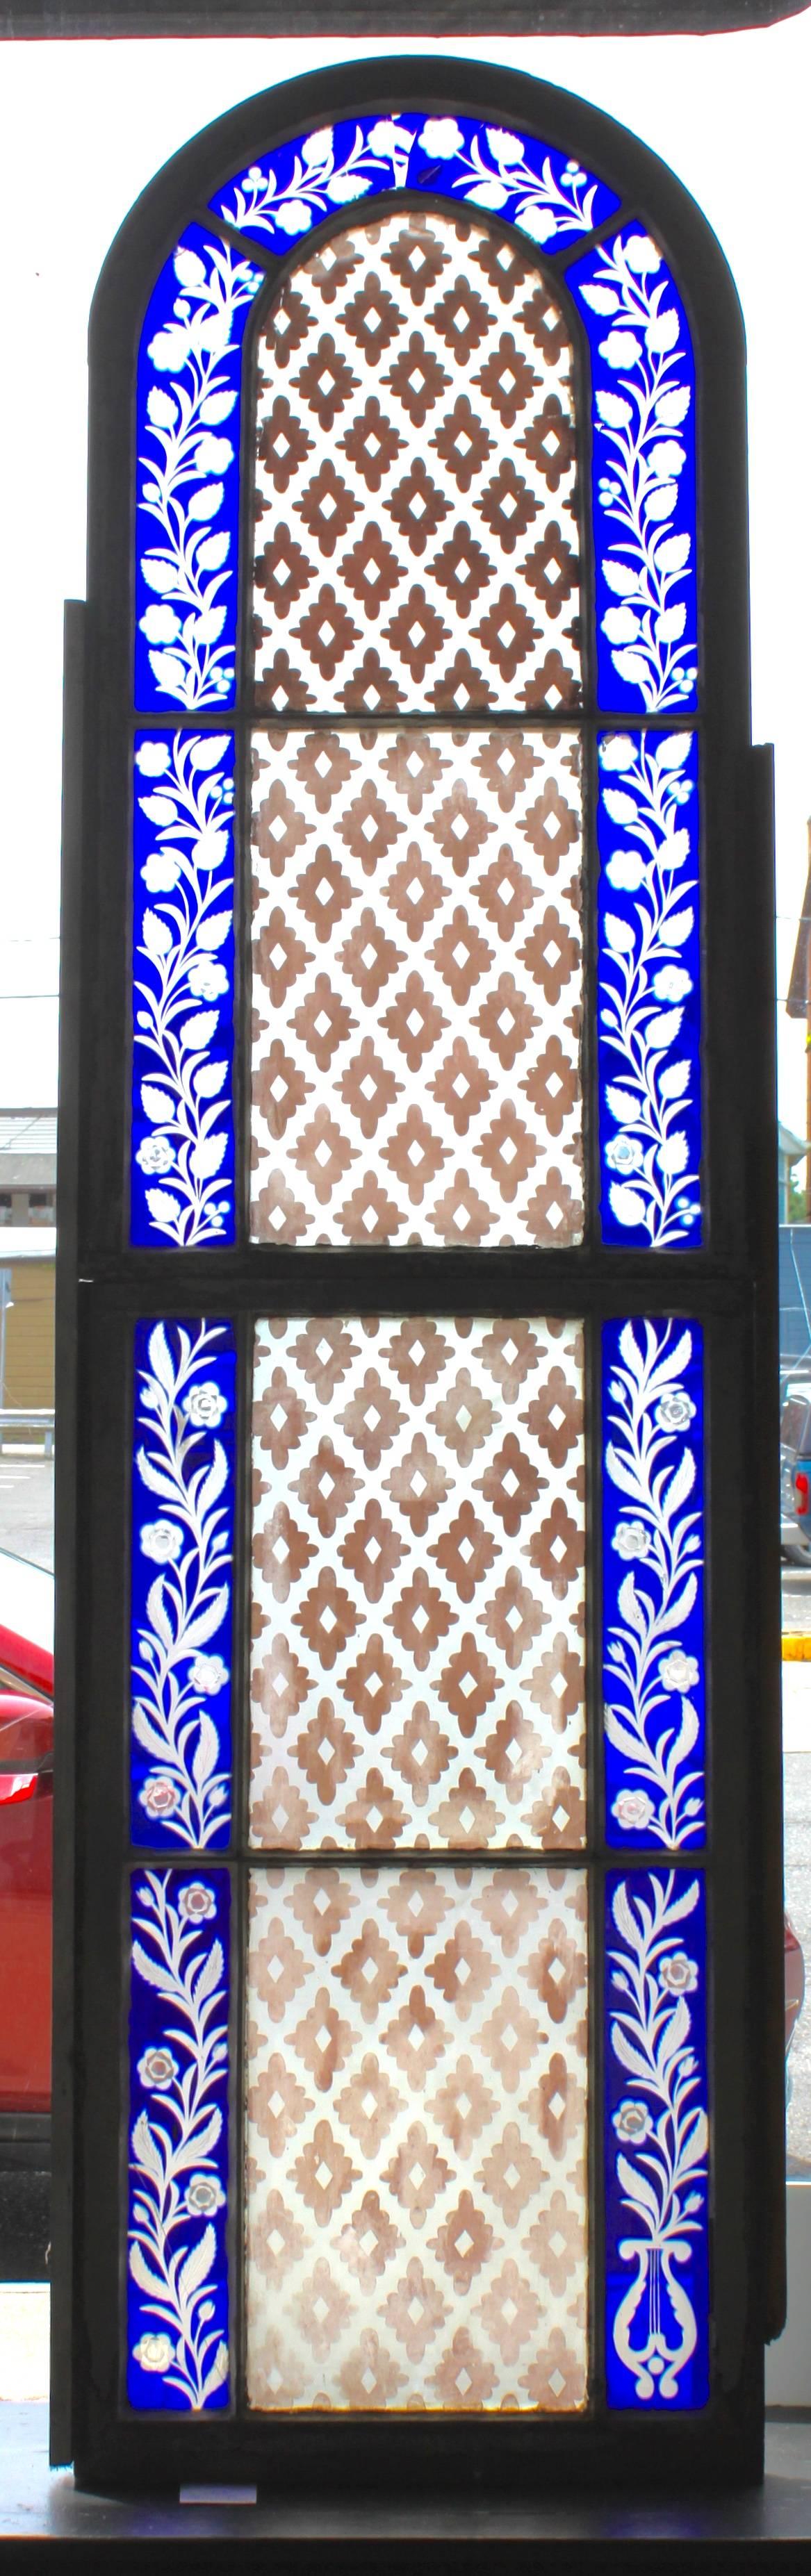 Beautiful Gothic revival windows with etched stained glass and stenciled glass panes.